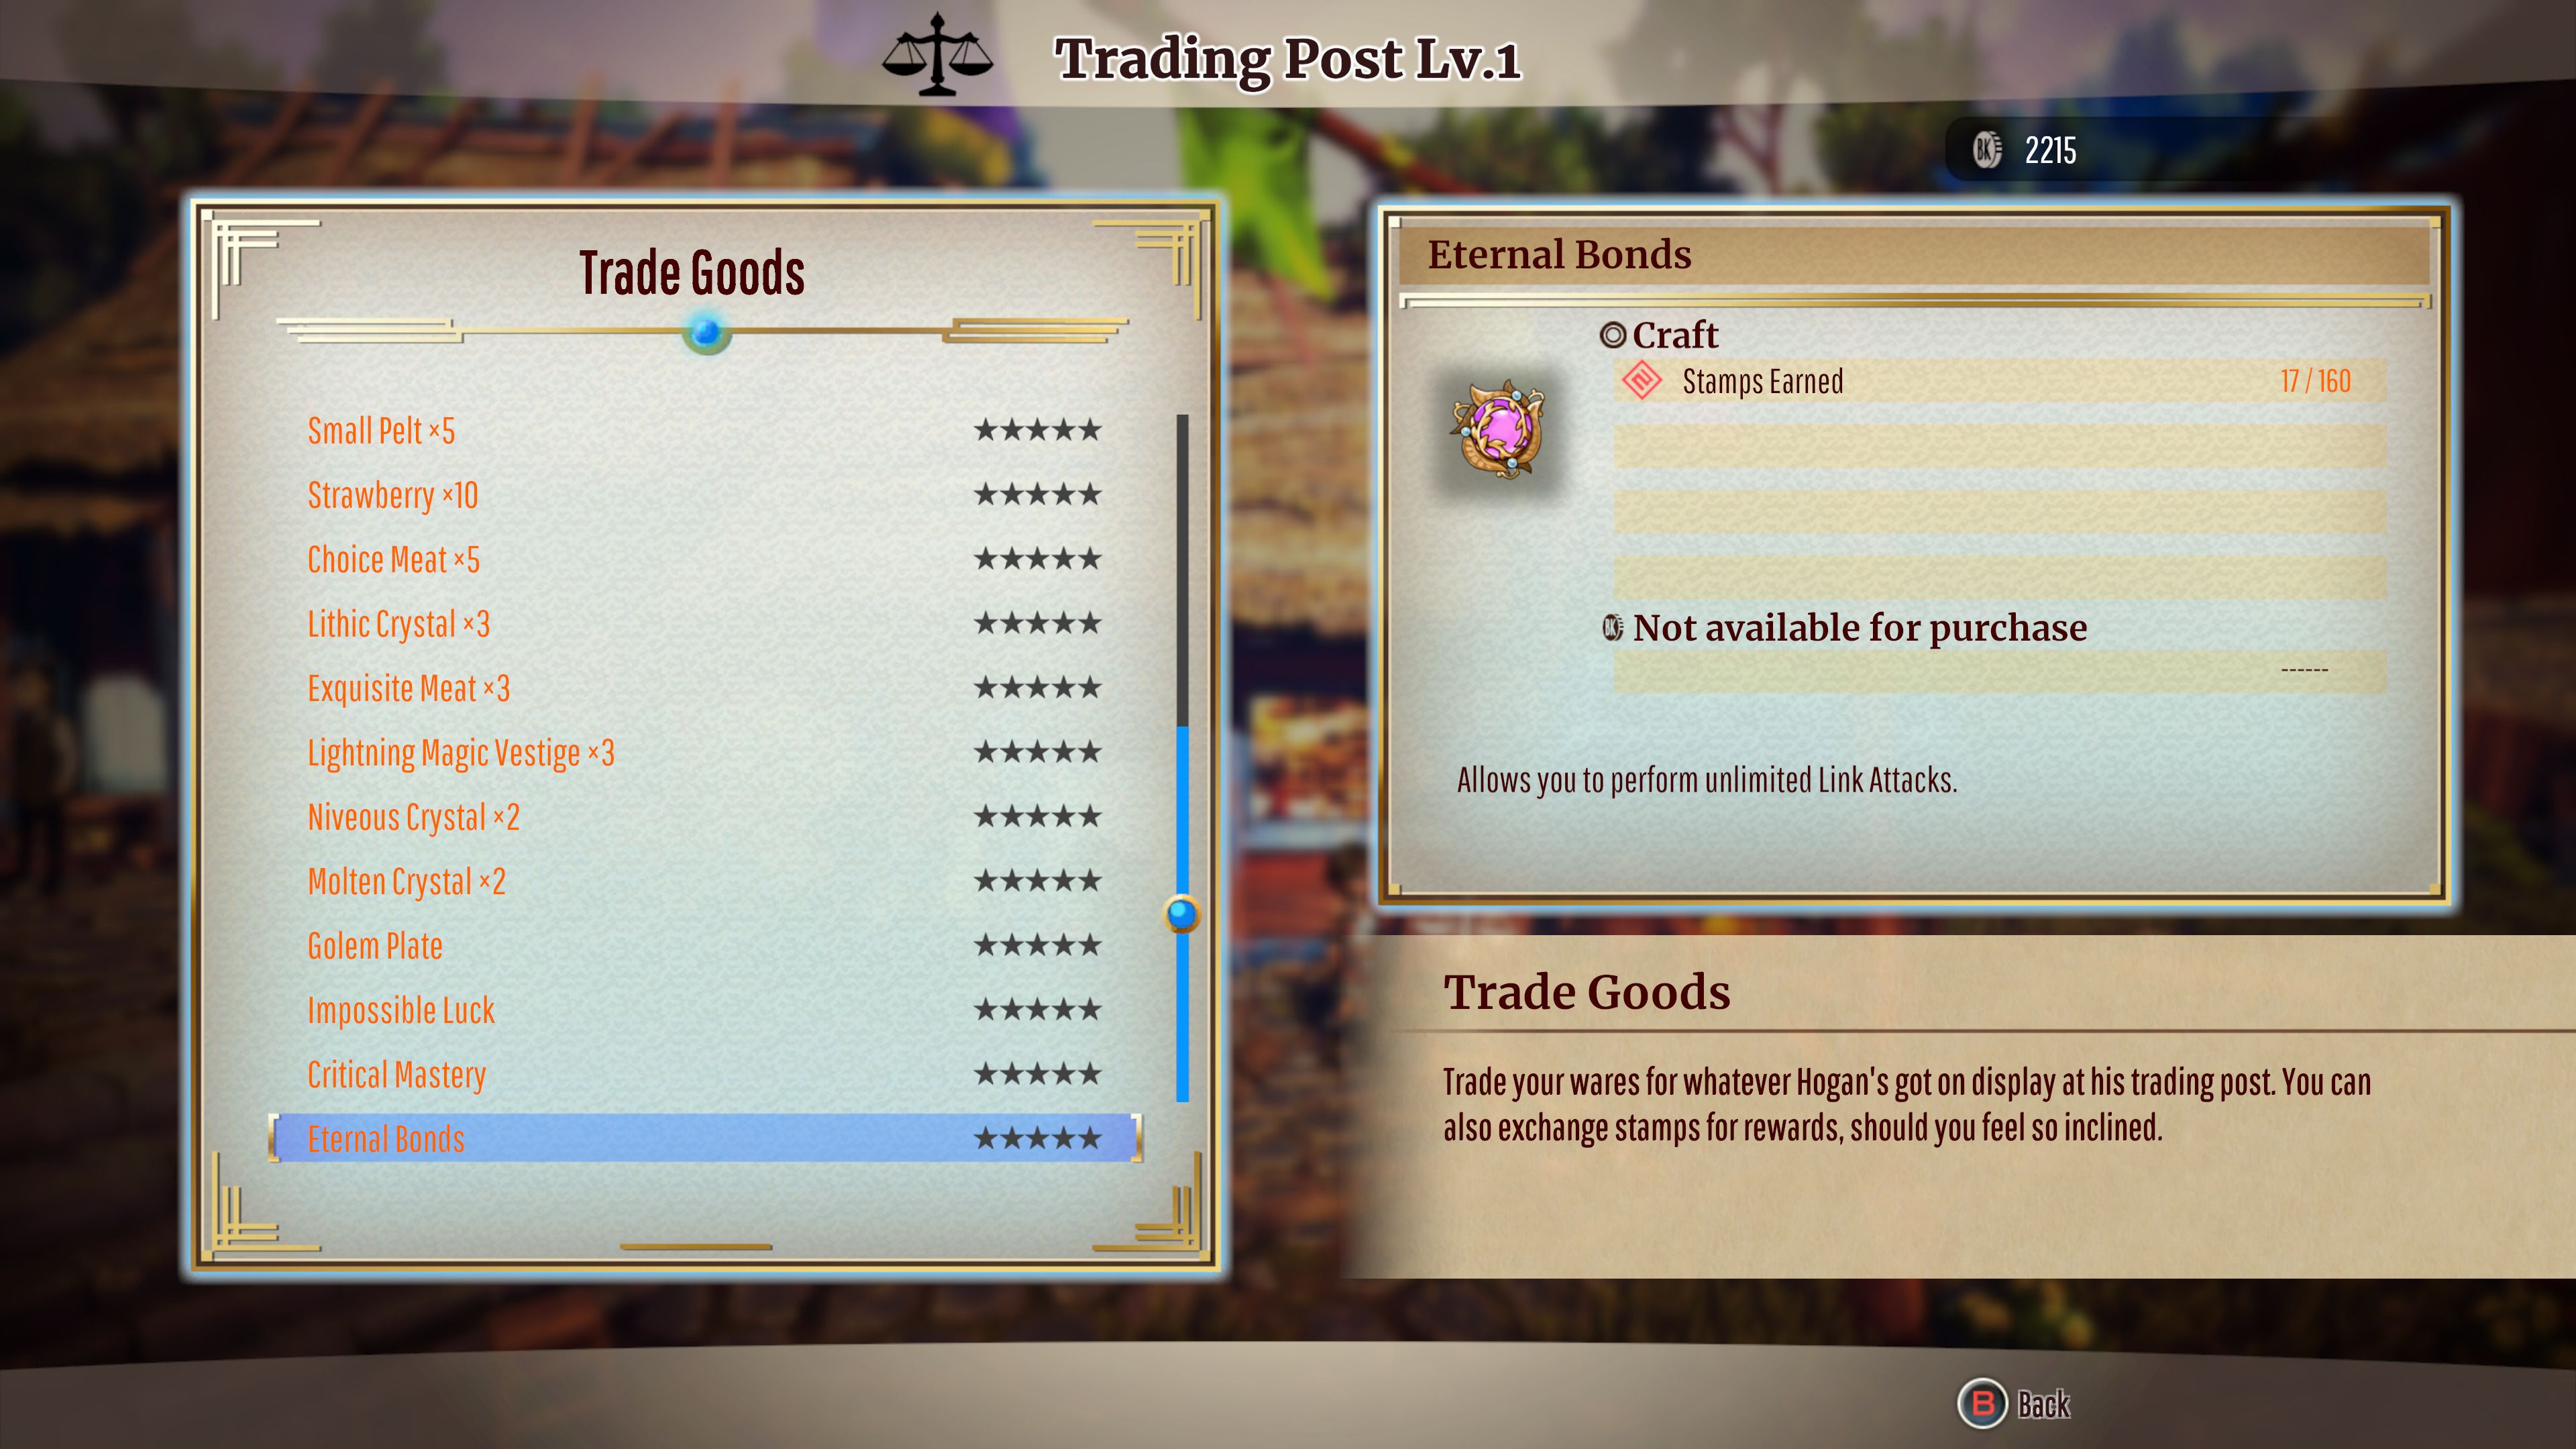 A list showing some of the Trading Post's items.